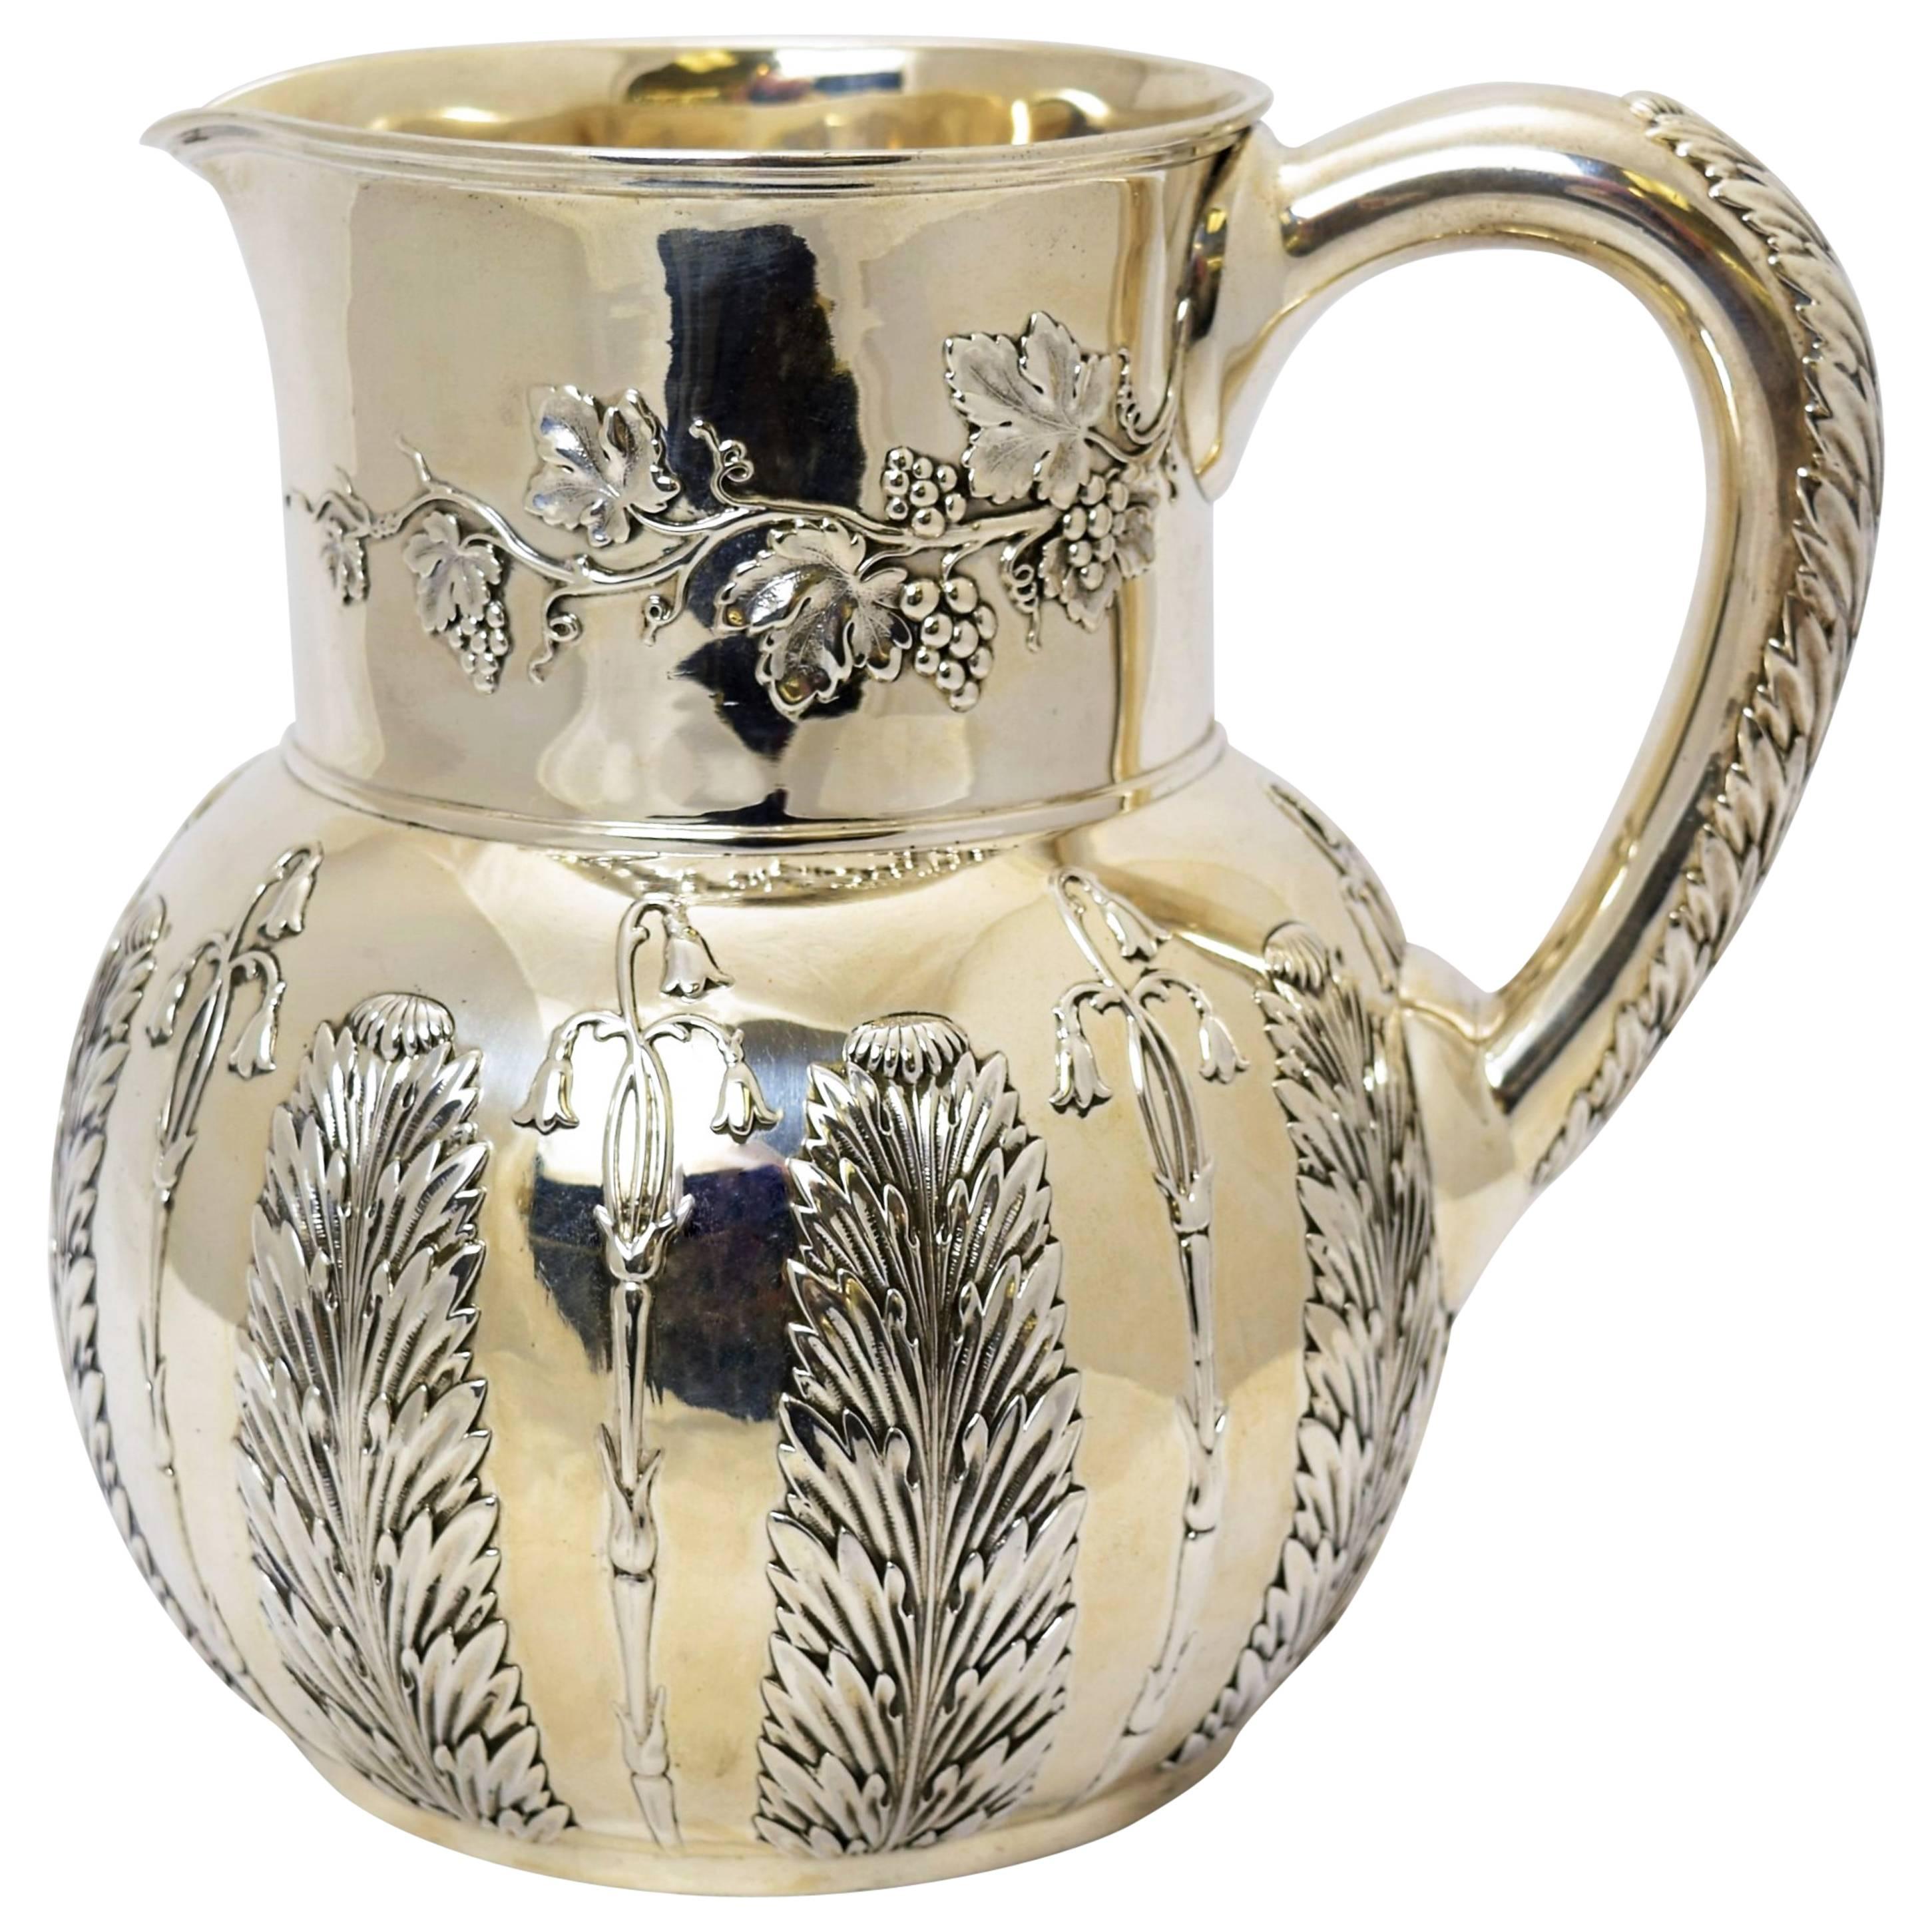 Tiffany & Co. Sterling Silver Water Pitcher, circa 1885